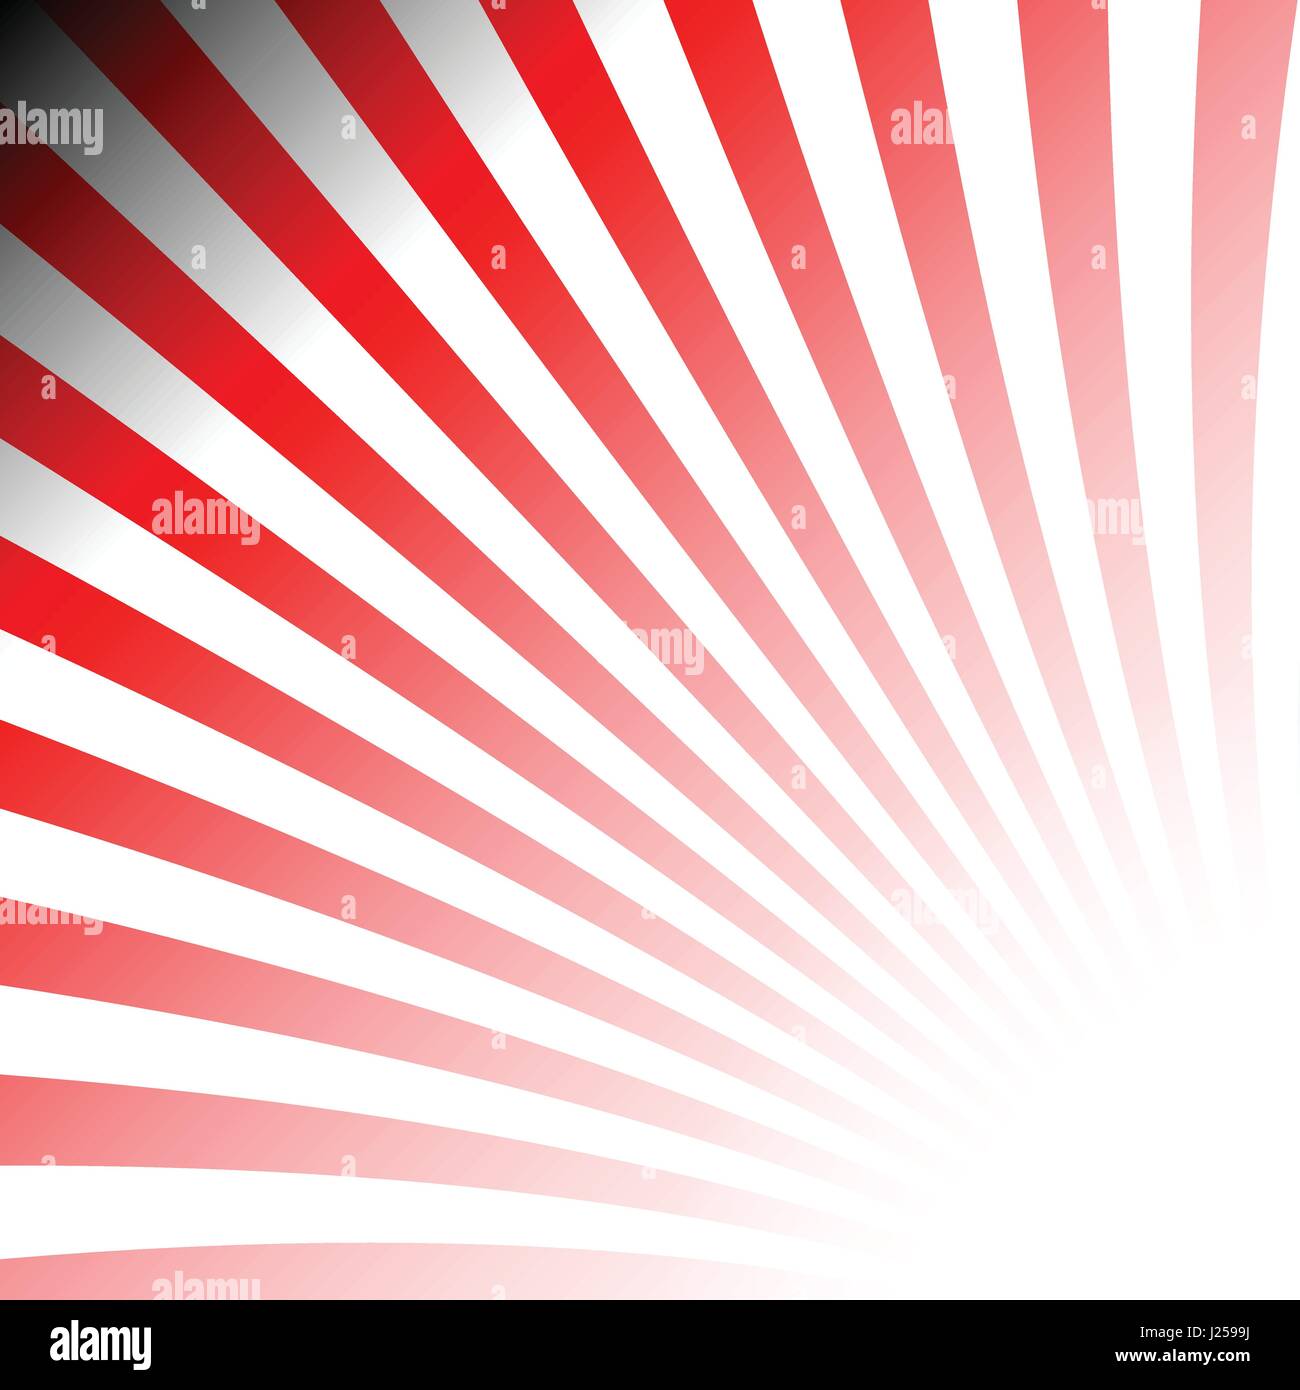 Two tone red stripes abstract background concept Stock Vector